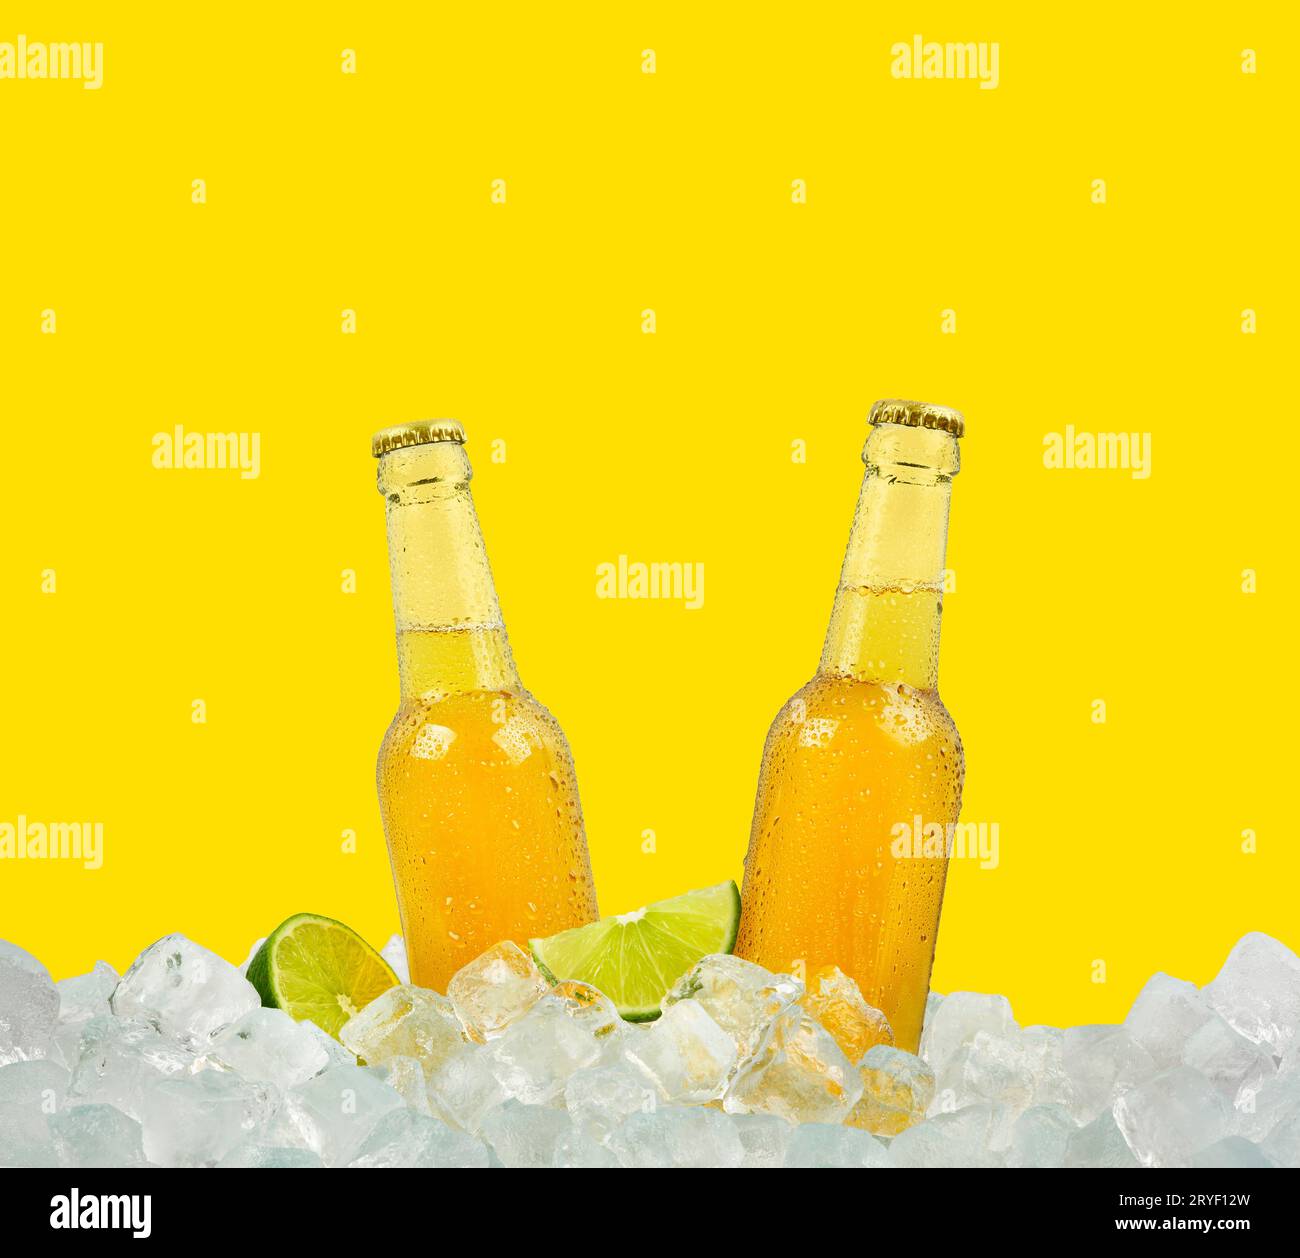 https://c8.alamy.com/comp/2RYF12W/two-bottles-of-lager-beer-on-ice-cubes-2RYF12W.jpg